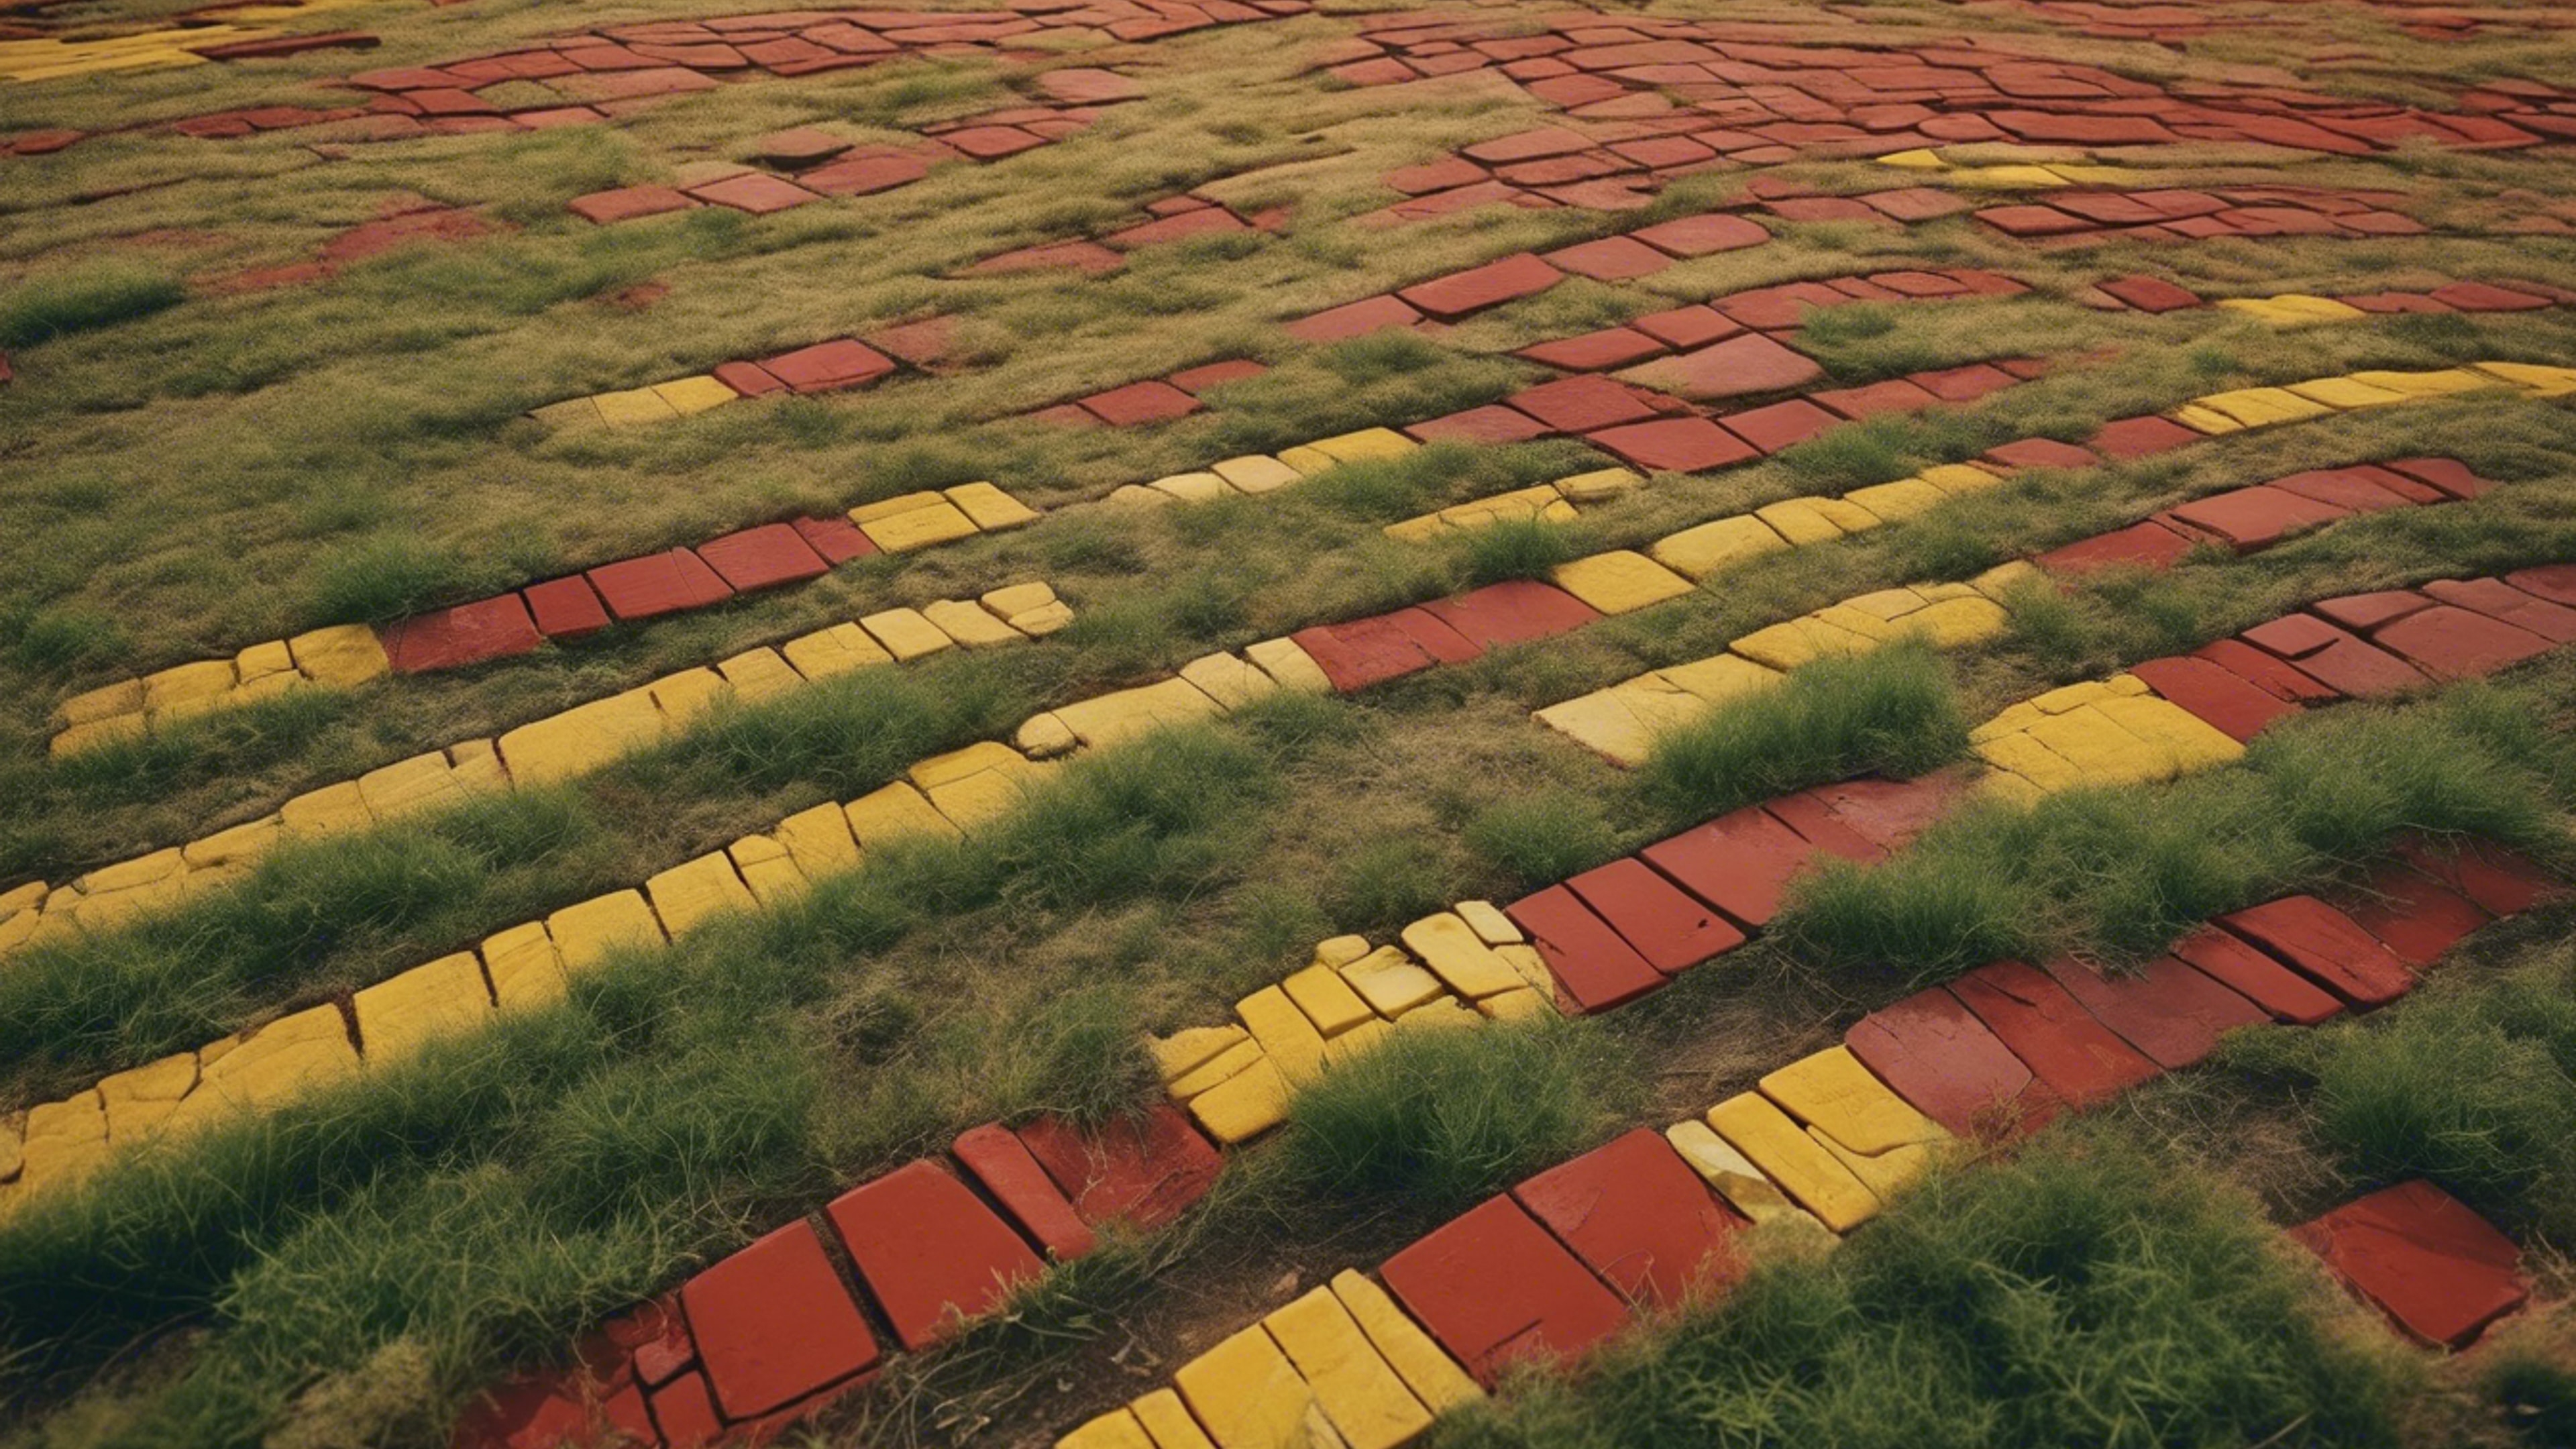 A bird's eye view of a red and yellow brick road weaving through a meadow. טפט[b665fbc055ed4704af98]